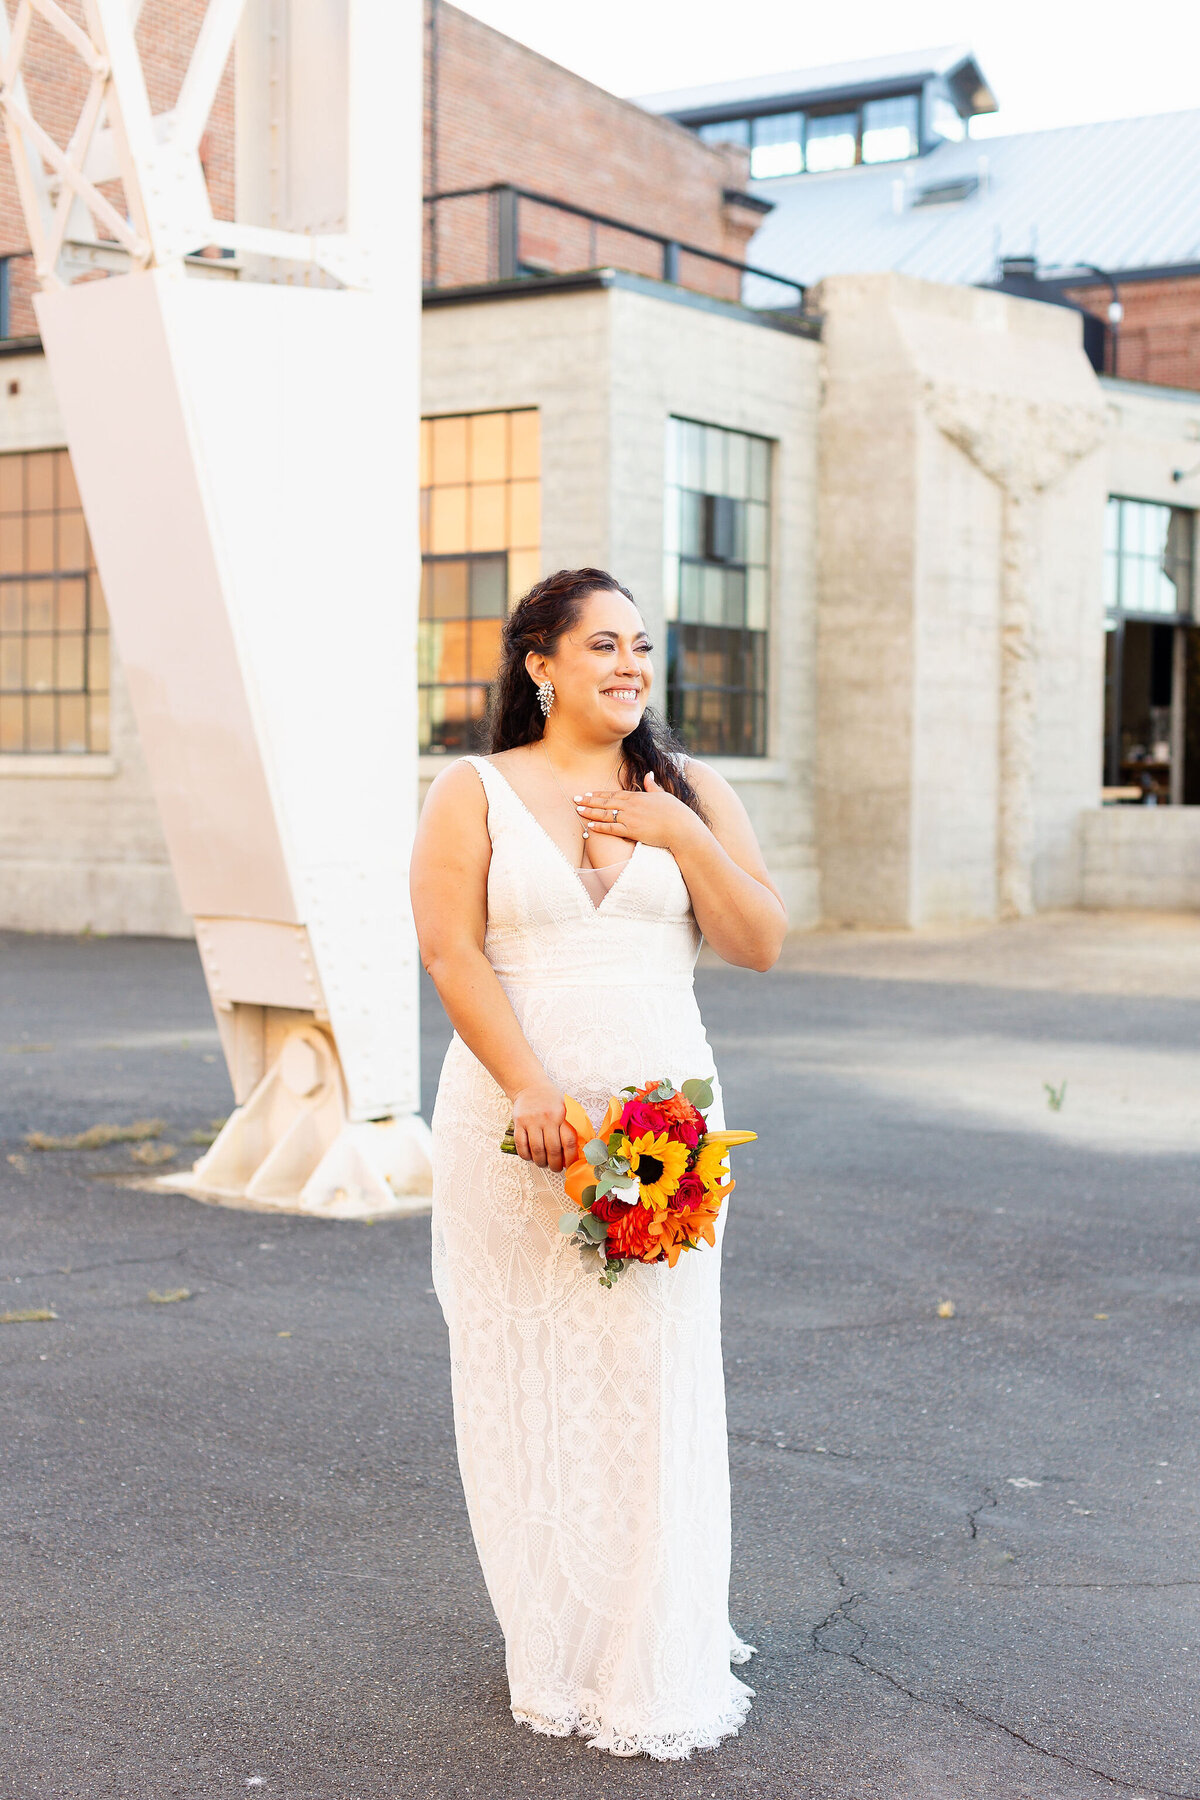 Bay Area Wedding And Portrait Photographer | Shannon Alyse Photography